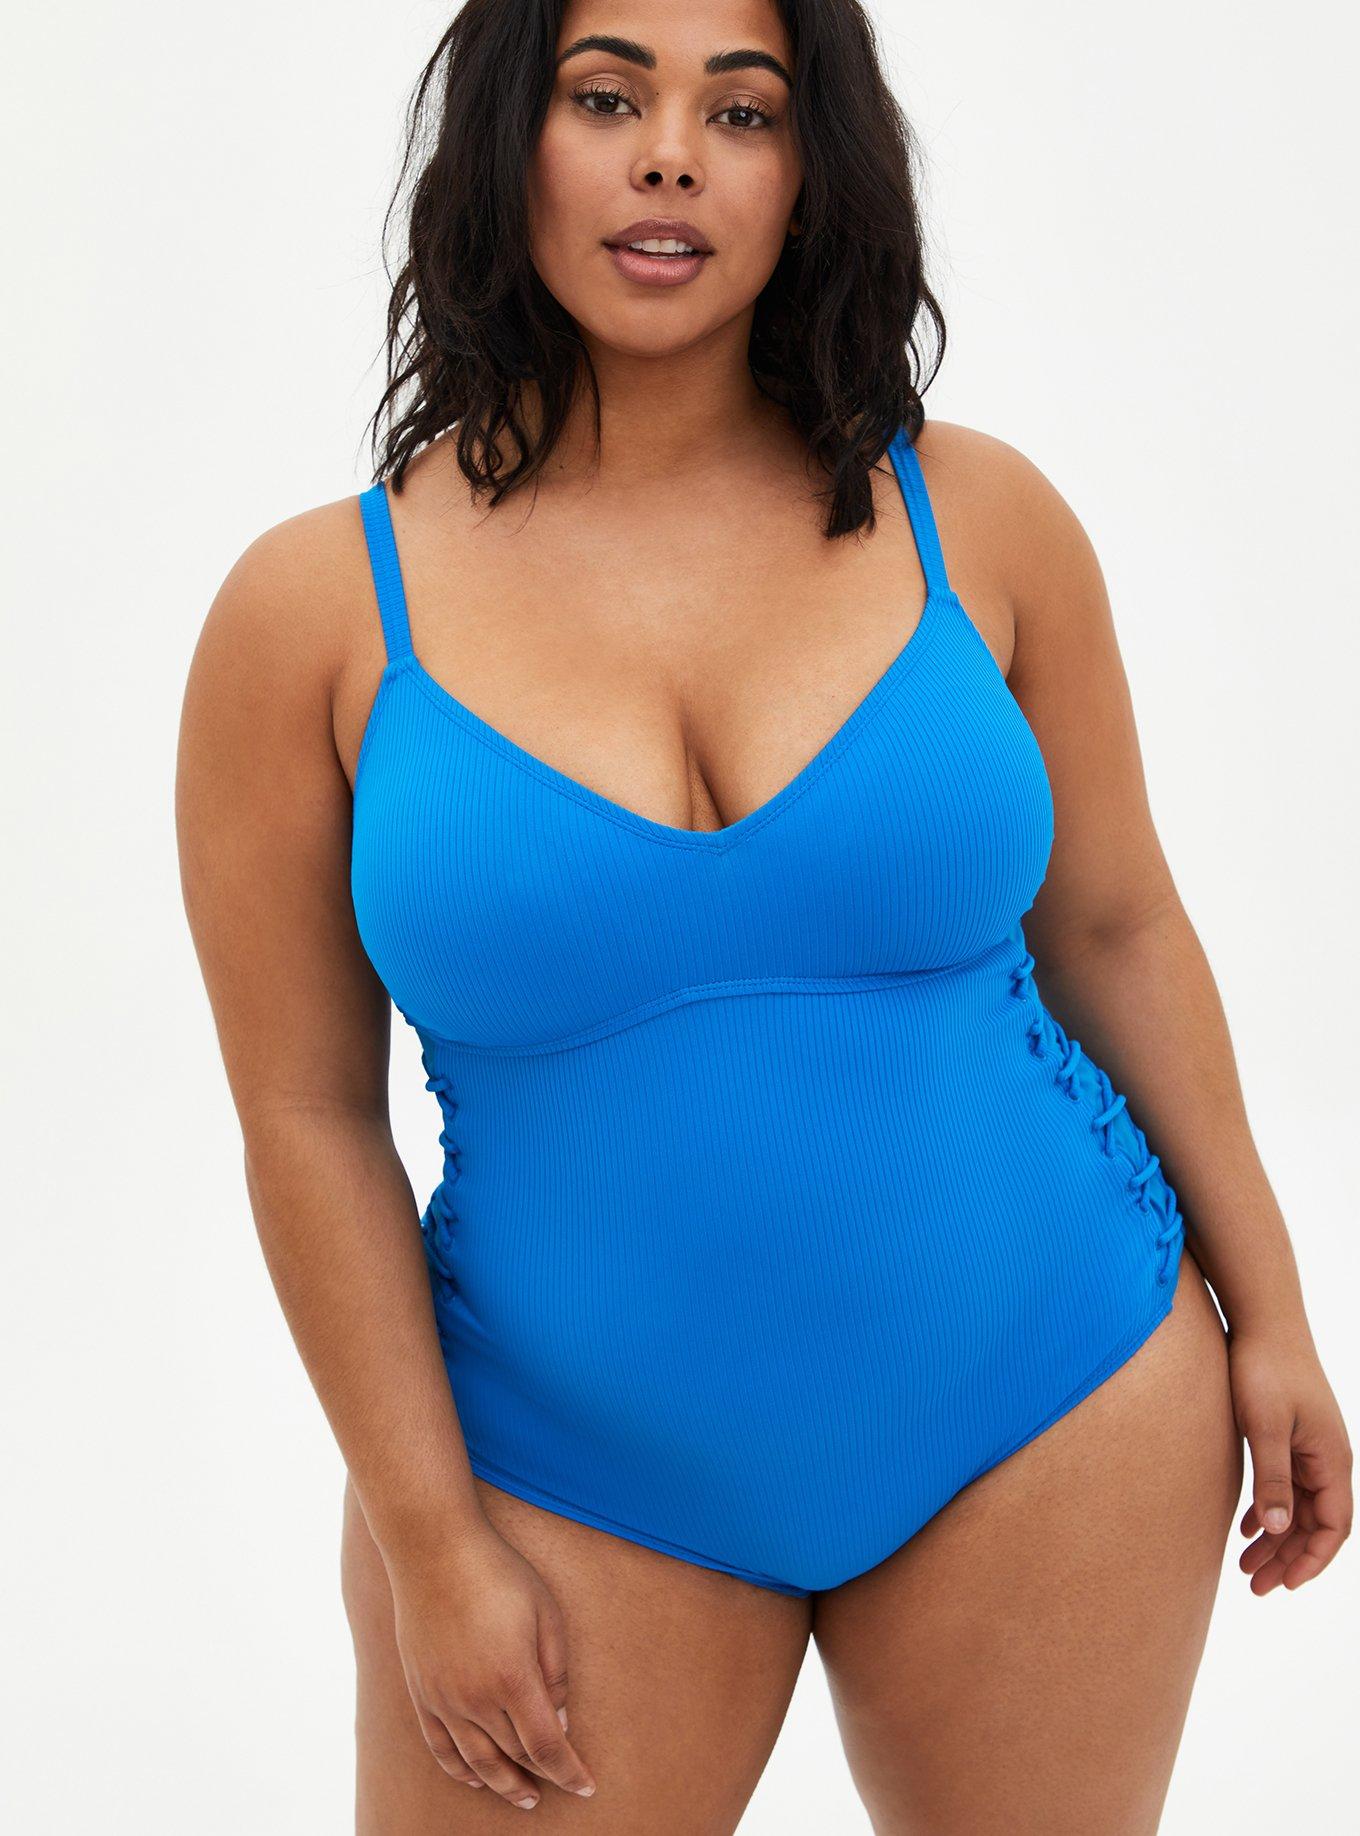 Sociala Ribbed Tie Side One-Piece Bathing Suit, 16 Flattering  One- Pieces, Because Looking Good in a Swimsuit Is Always a Vibe